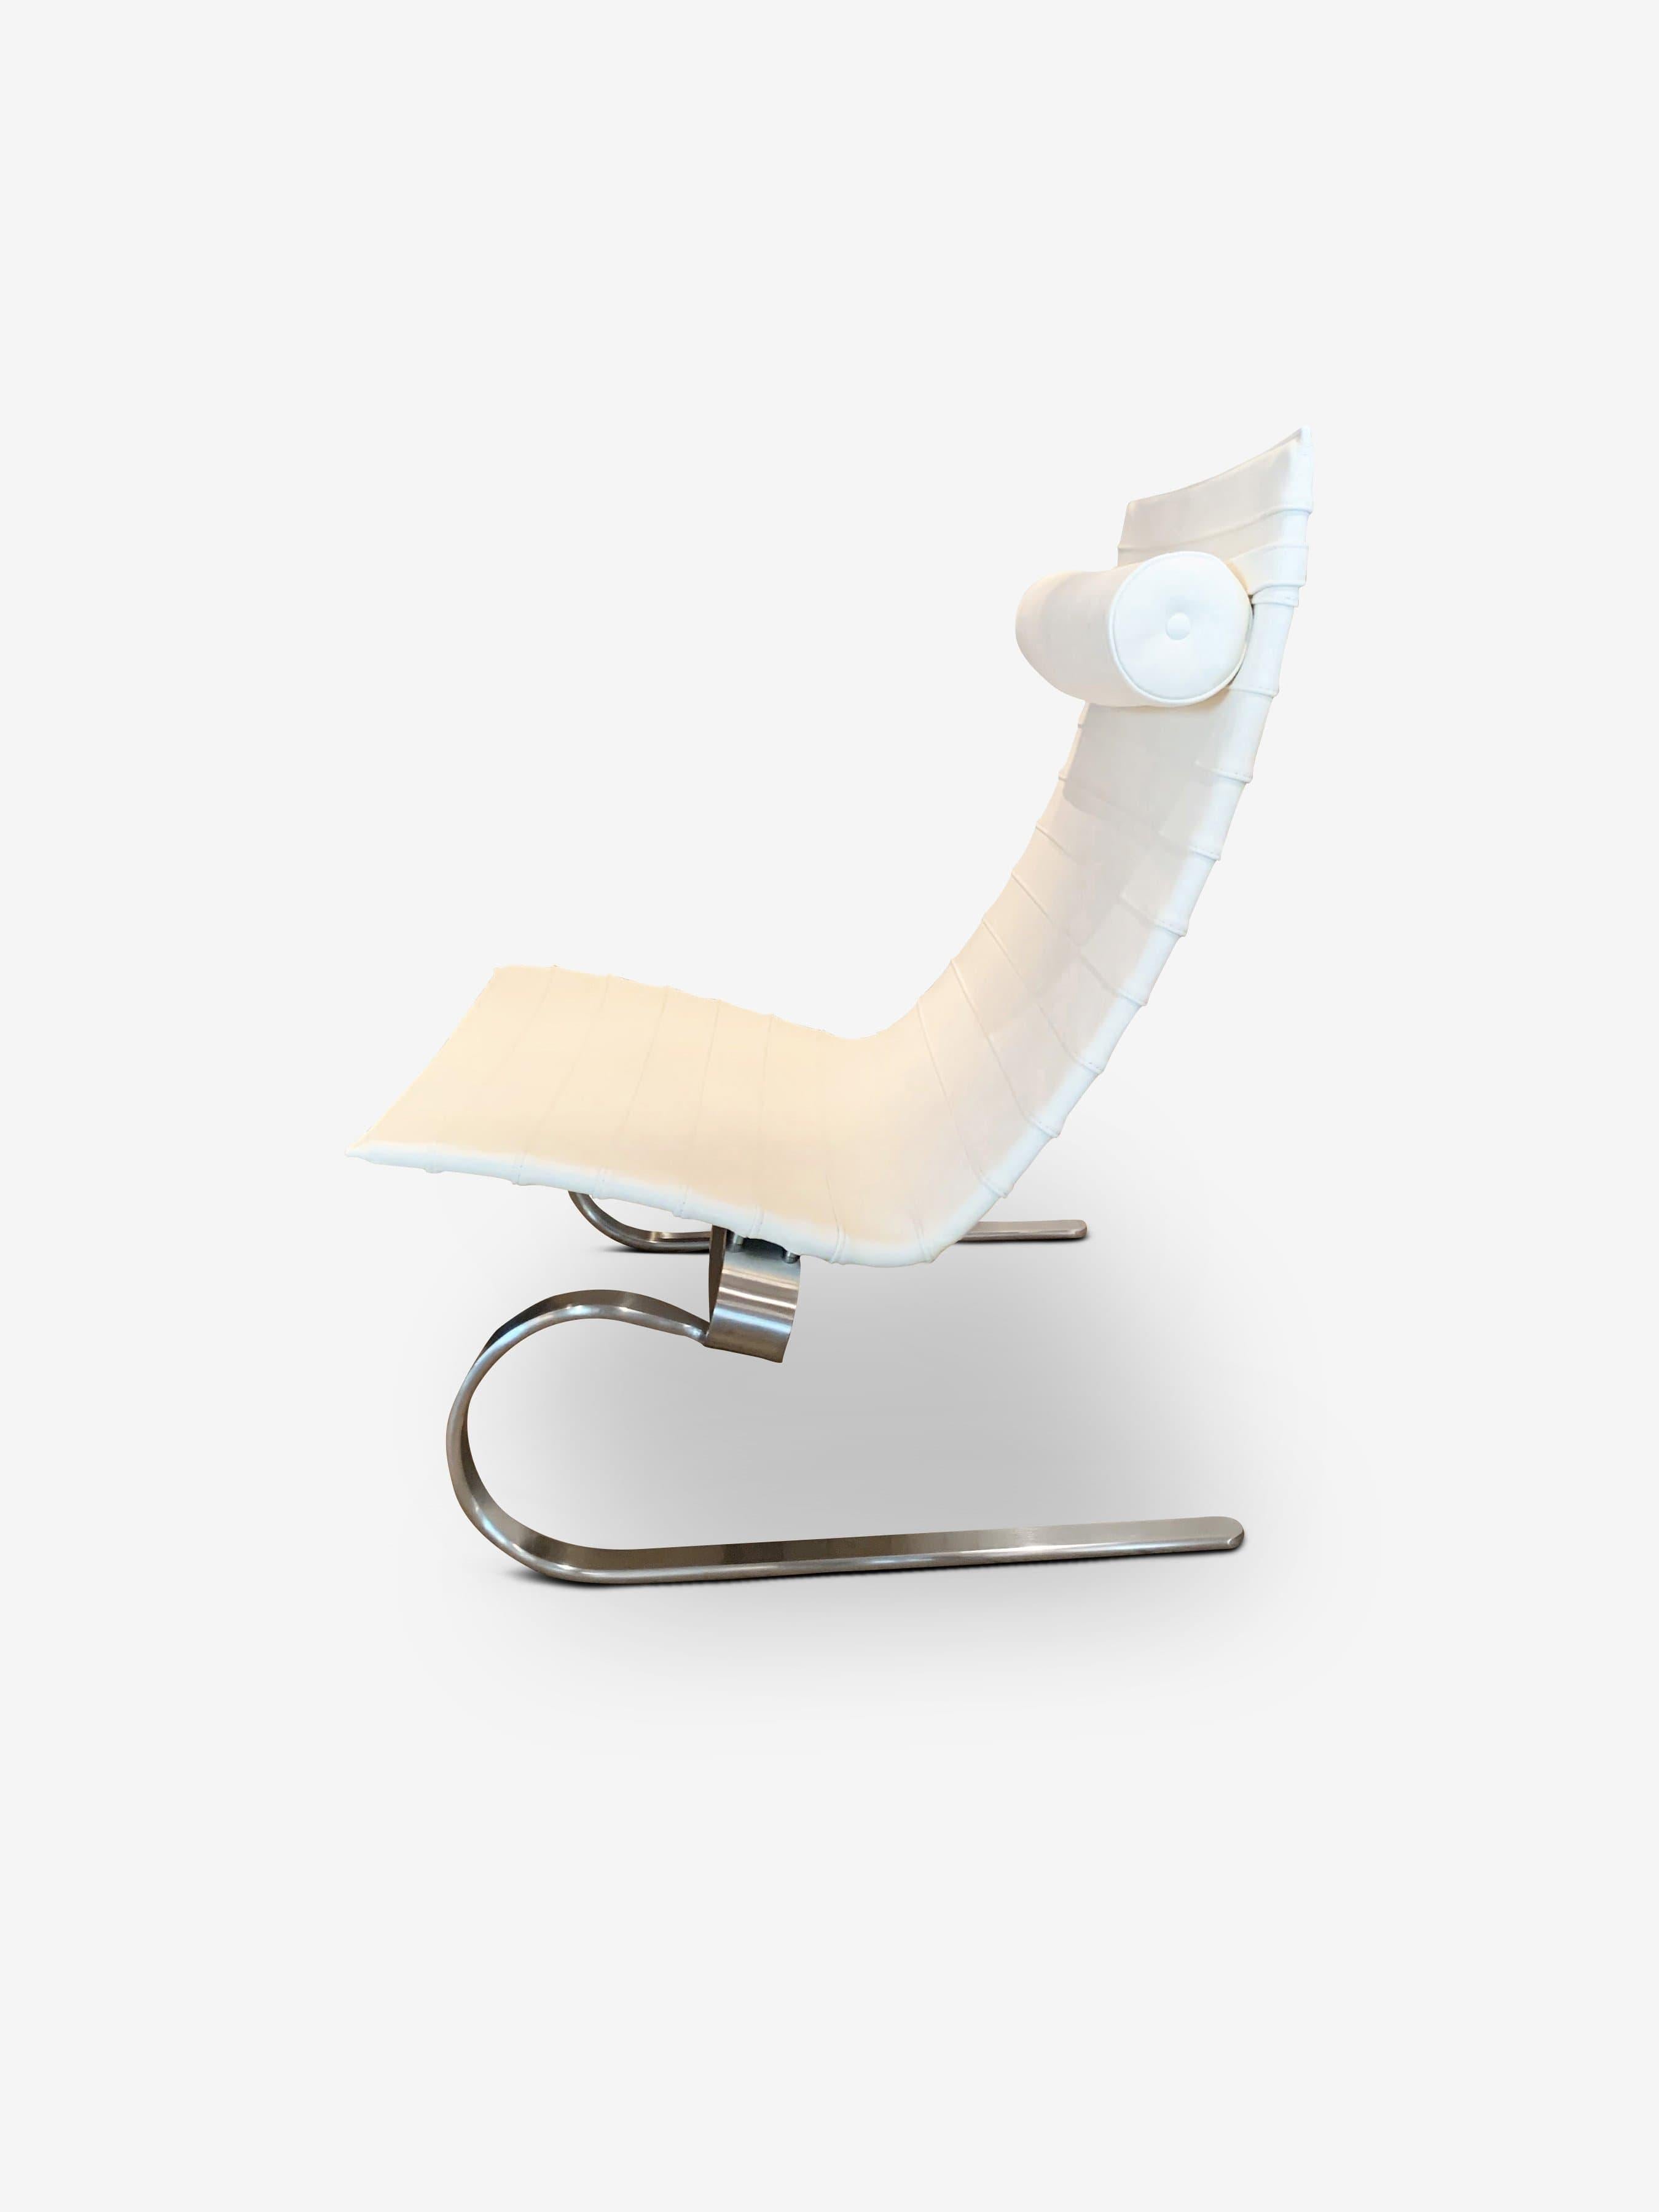 PK20 lounge chair by Poul Kjaerholm for Fritz Hansen in white leather is an elegant lounge and laidback chair built upon a flexible matt chromed spring steel frame.

With a love for minimalism, Danish designer Poul Kjaerholm designed his pieces